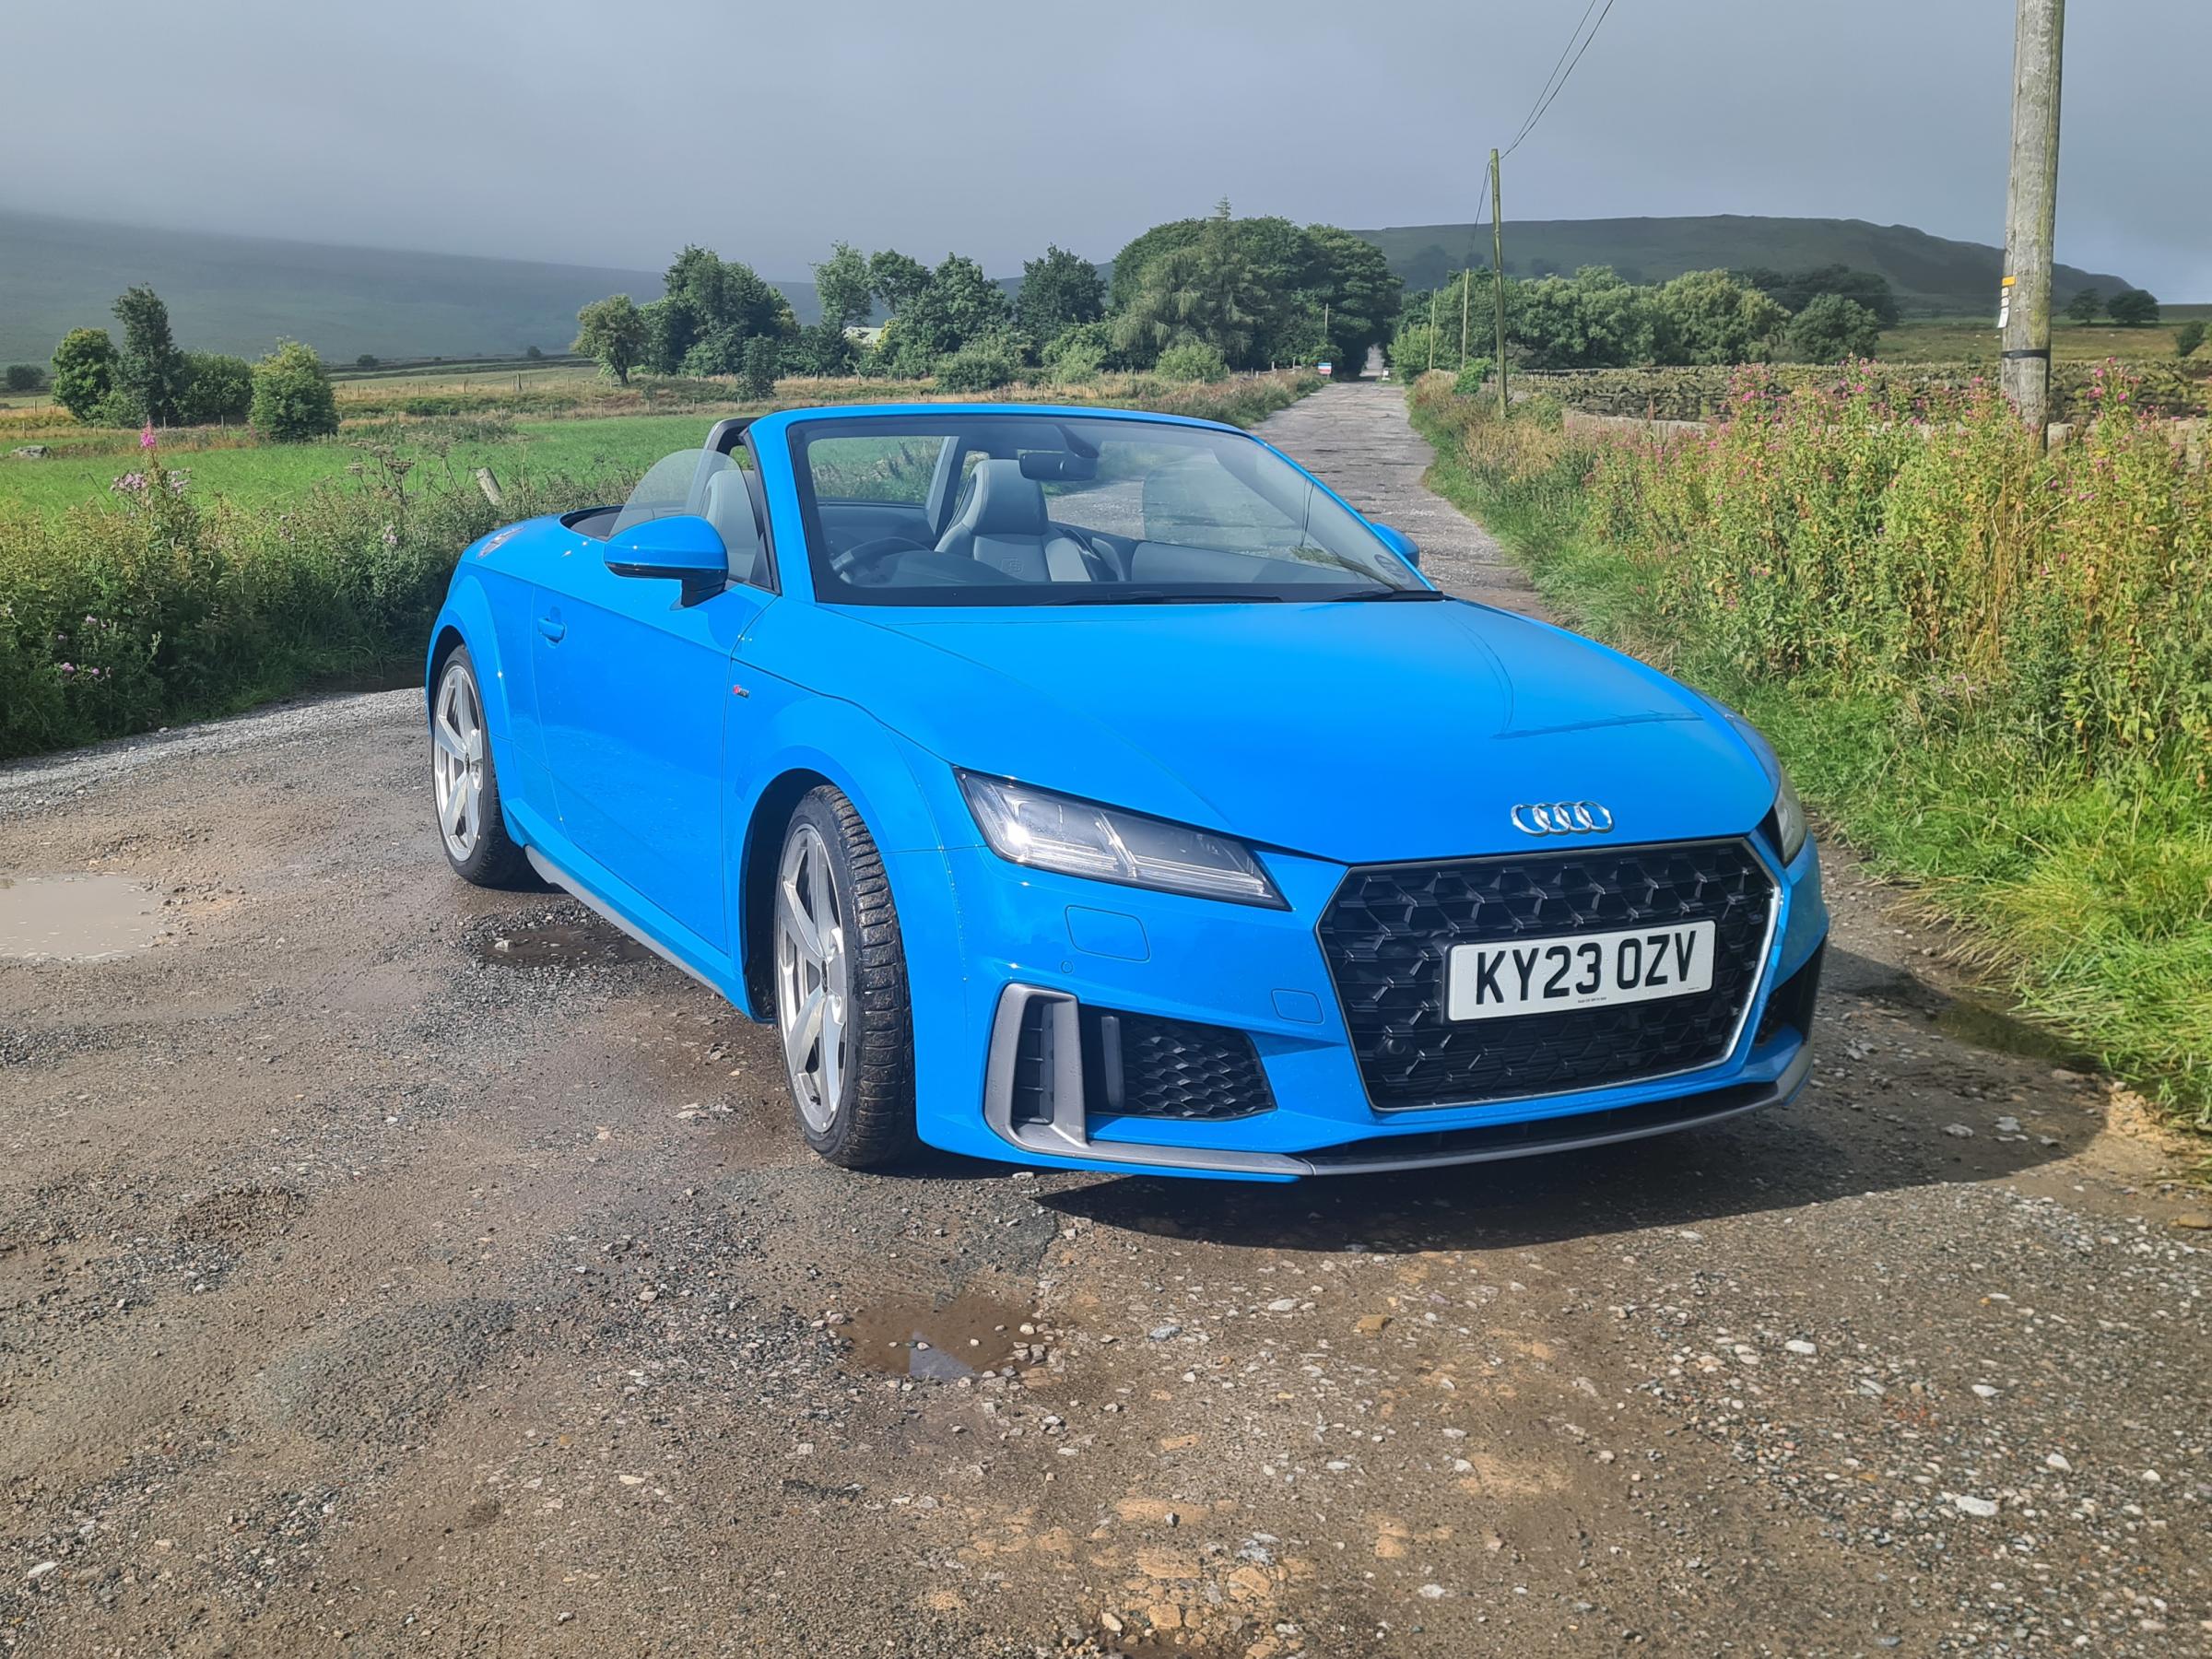 580-Mile Audi TT Reminds Us Why Everyone Fell For The Bauhaus Original